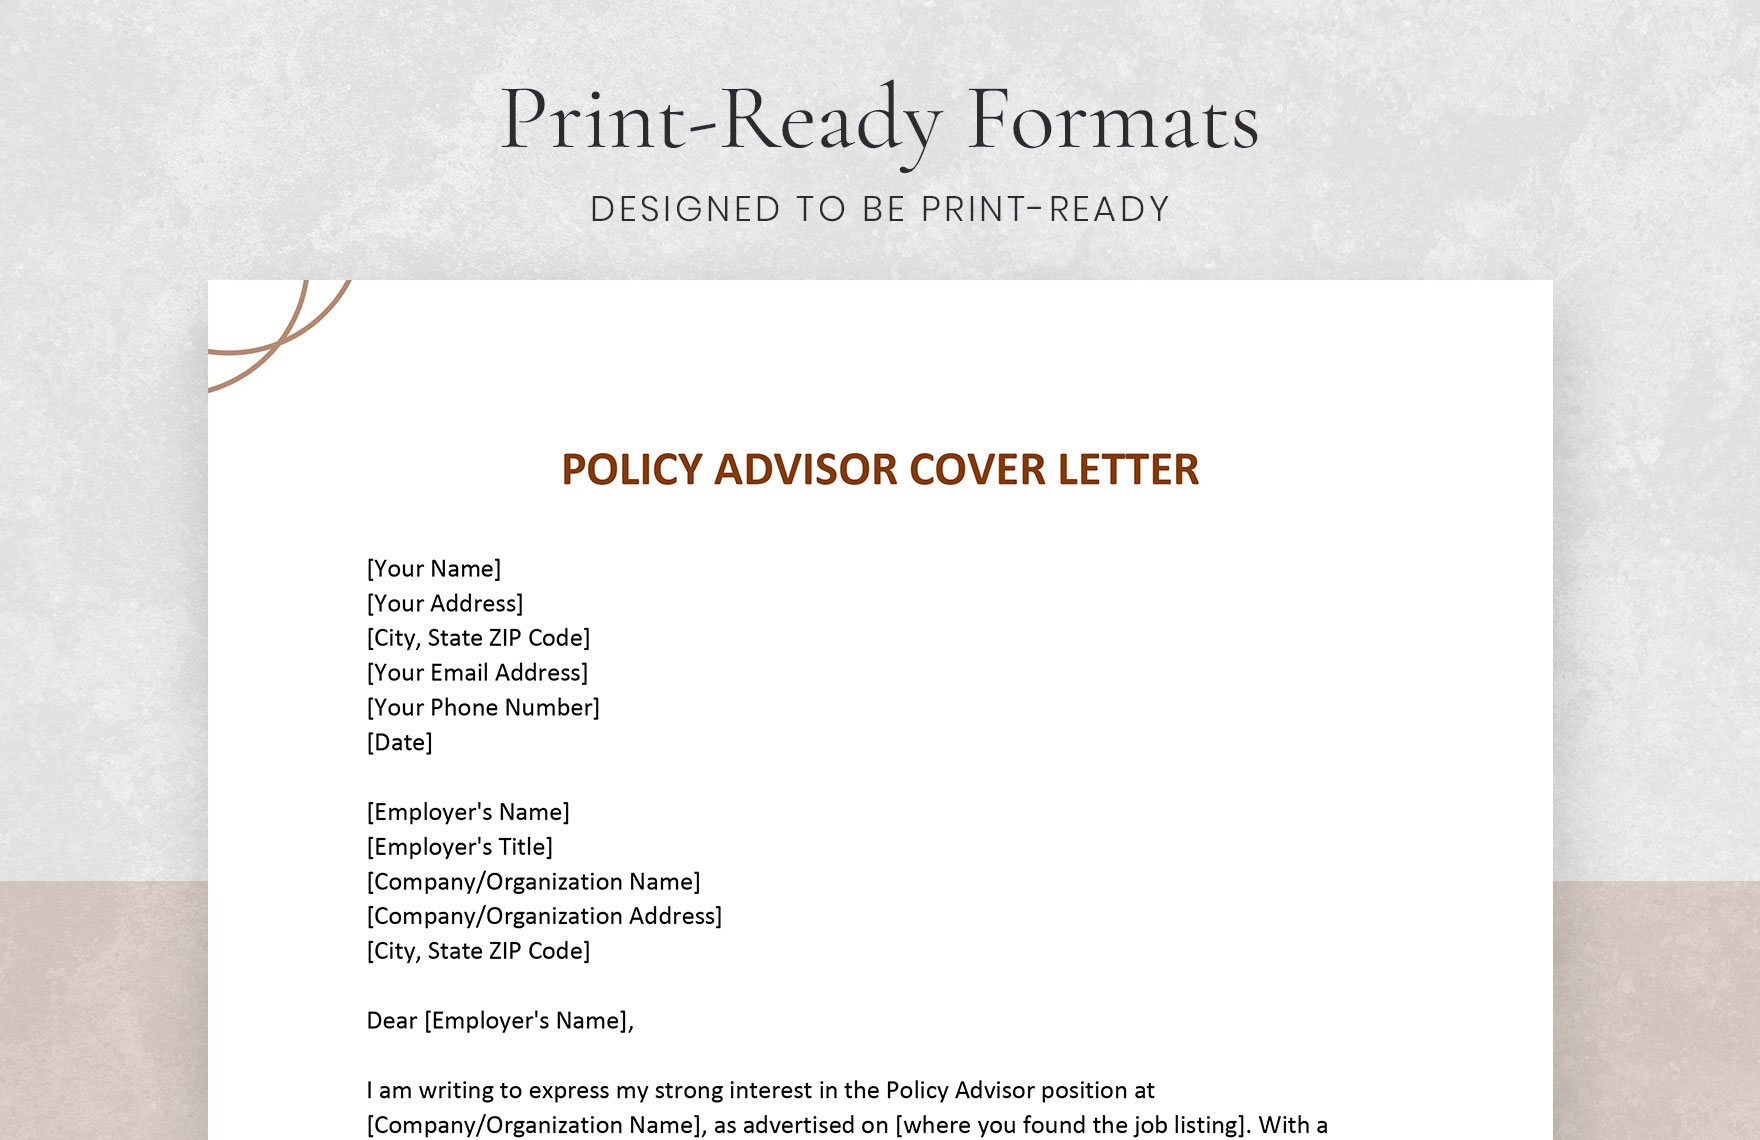 Policy Advisor Cover Letter